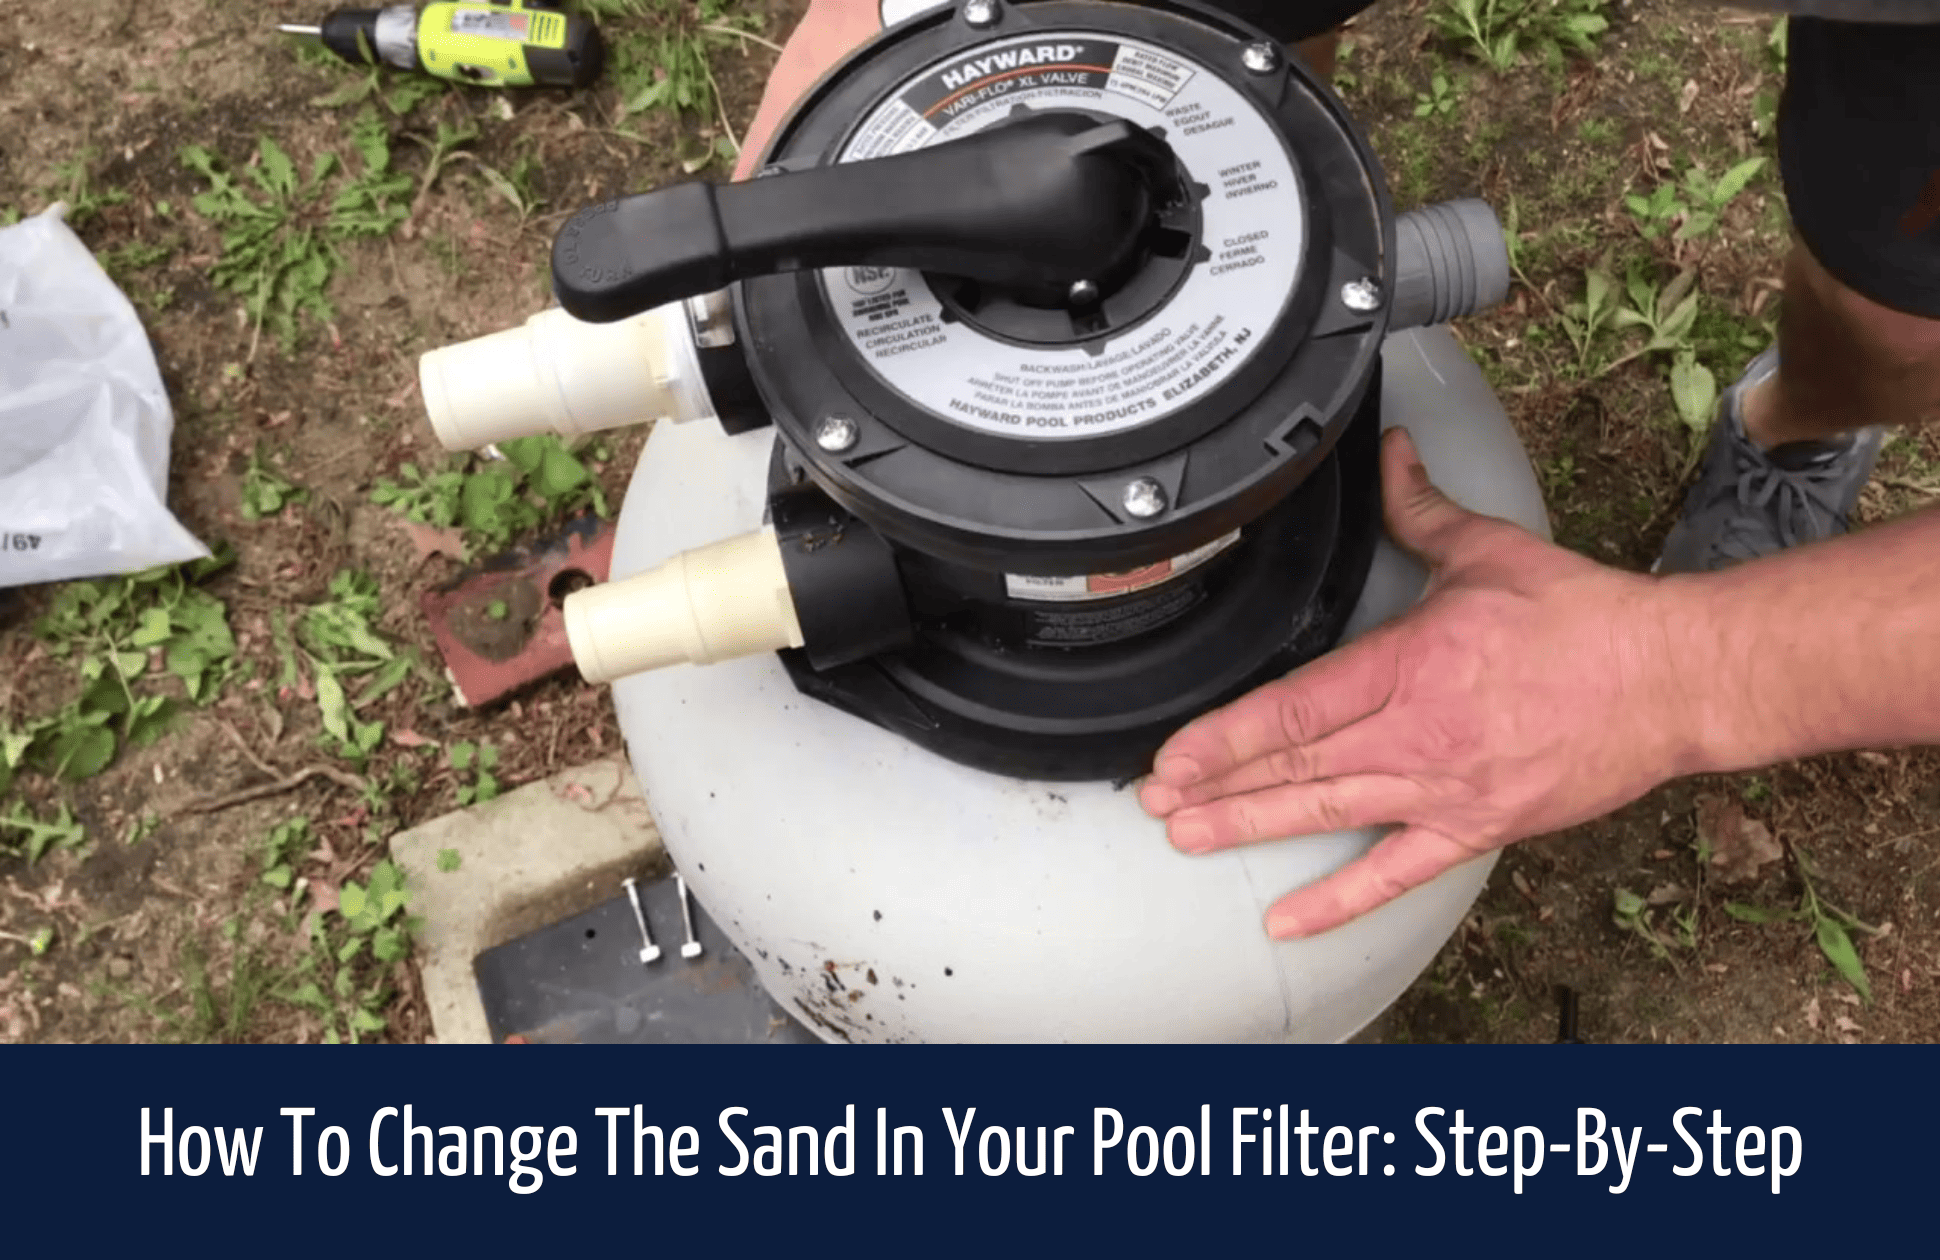 How-To-Change-The-Sand-In-Your-Pool-Filter-Step-By-Step